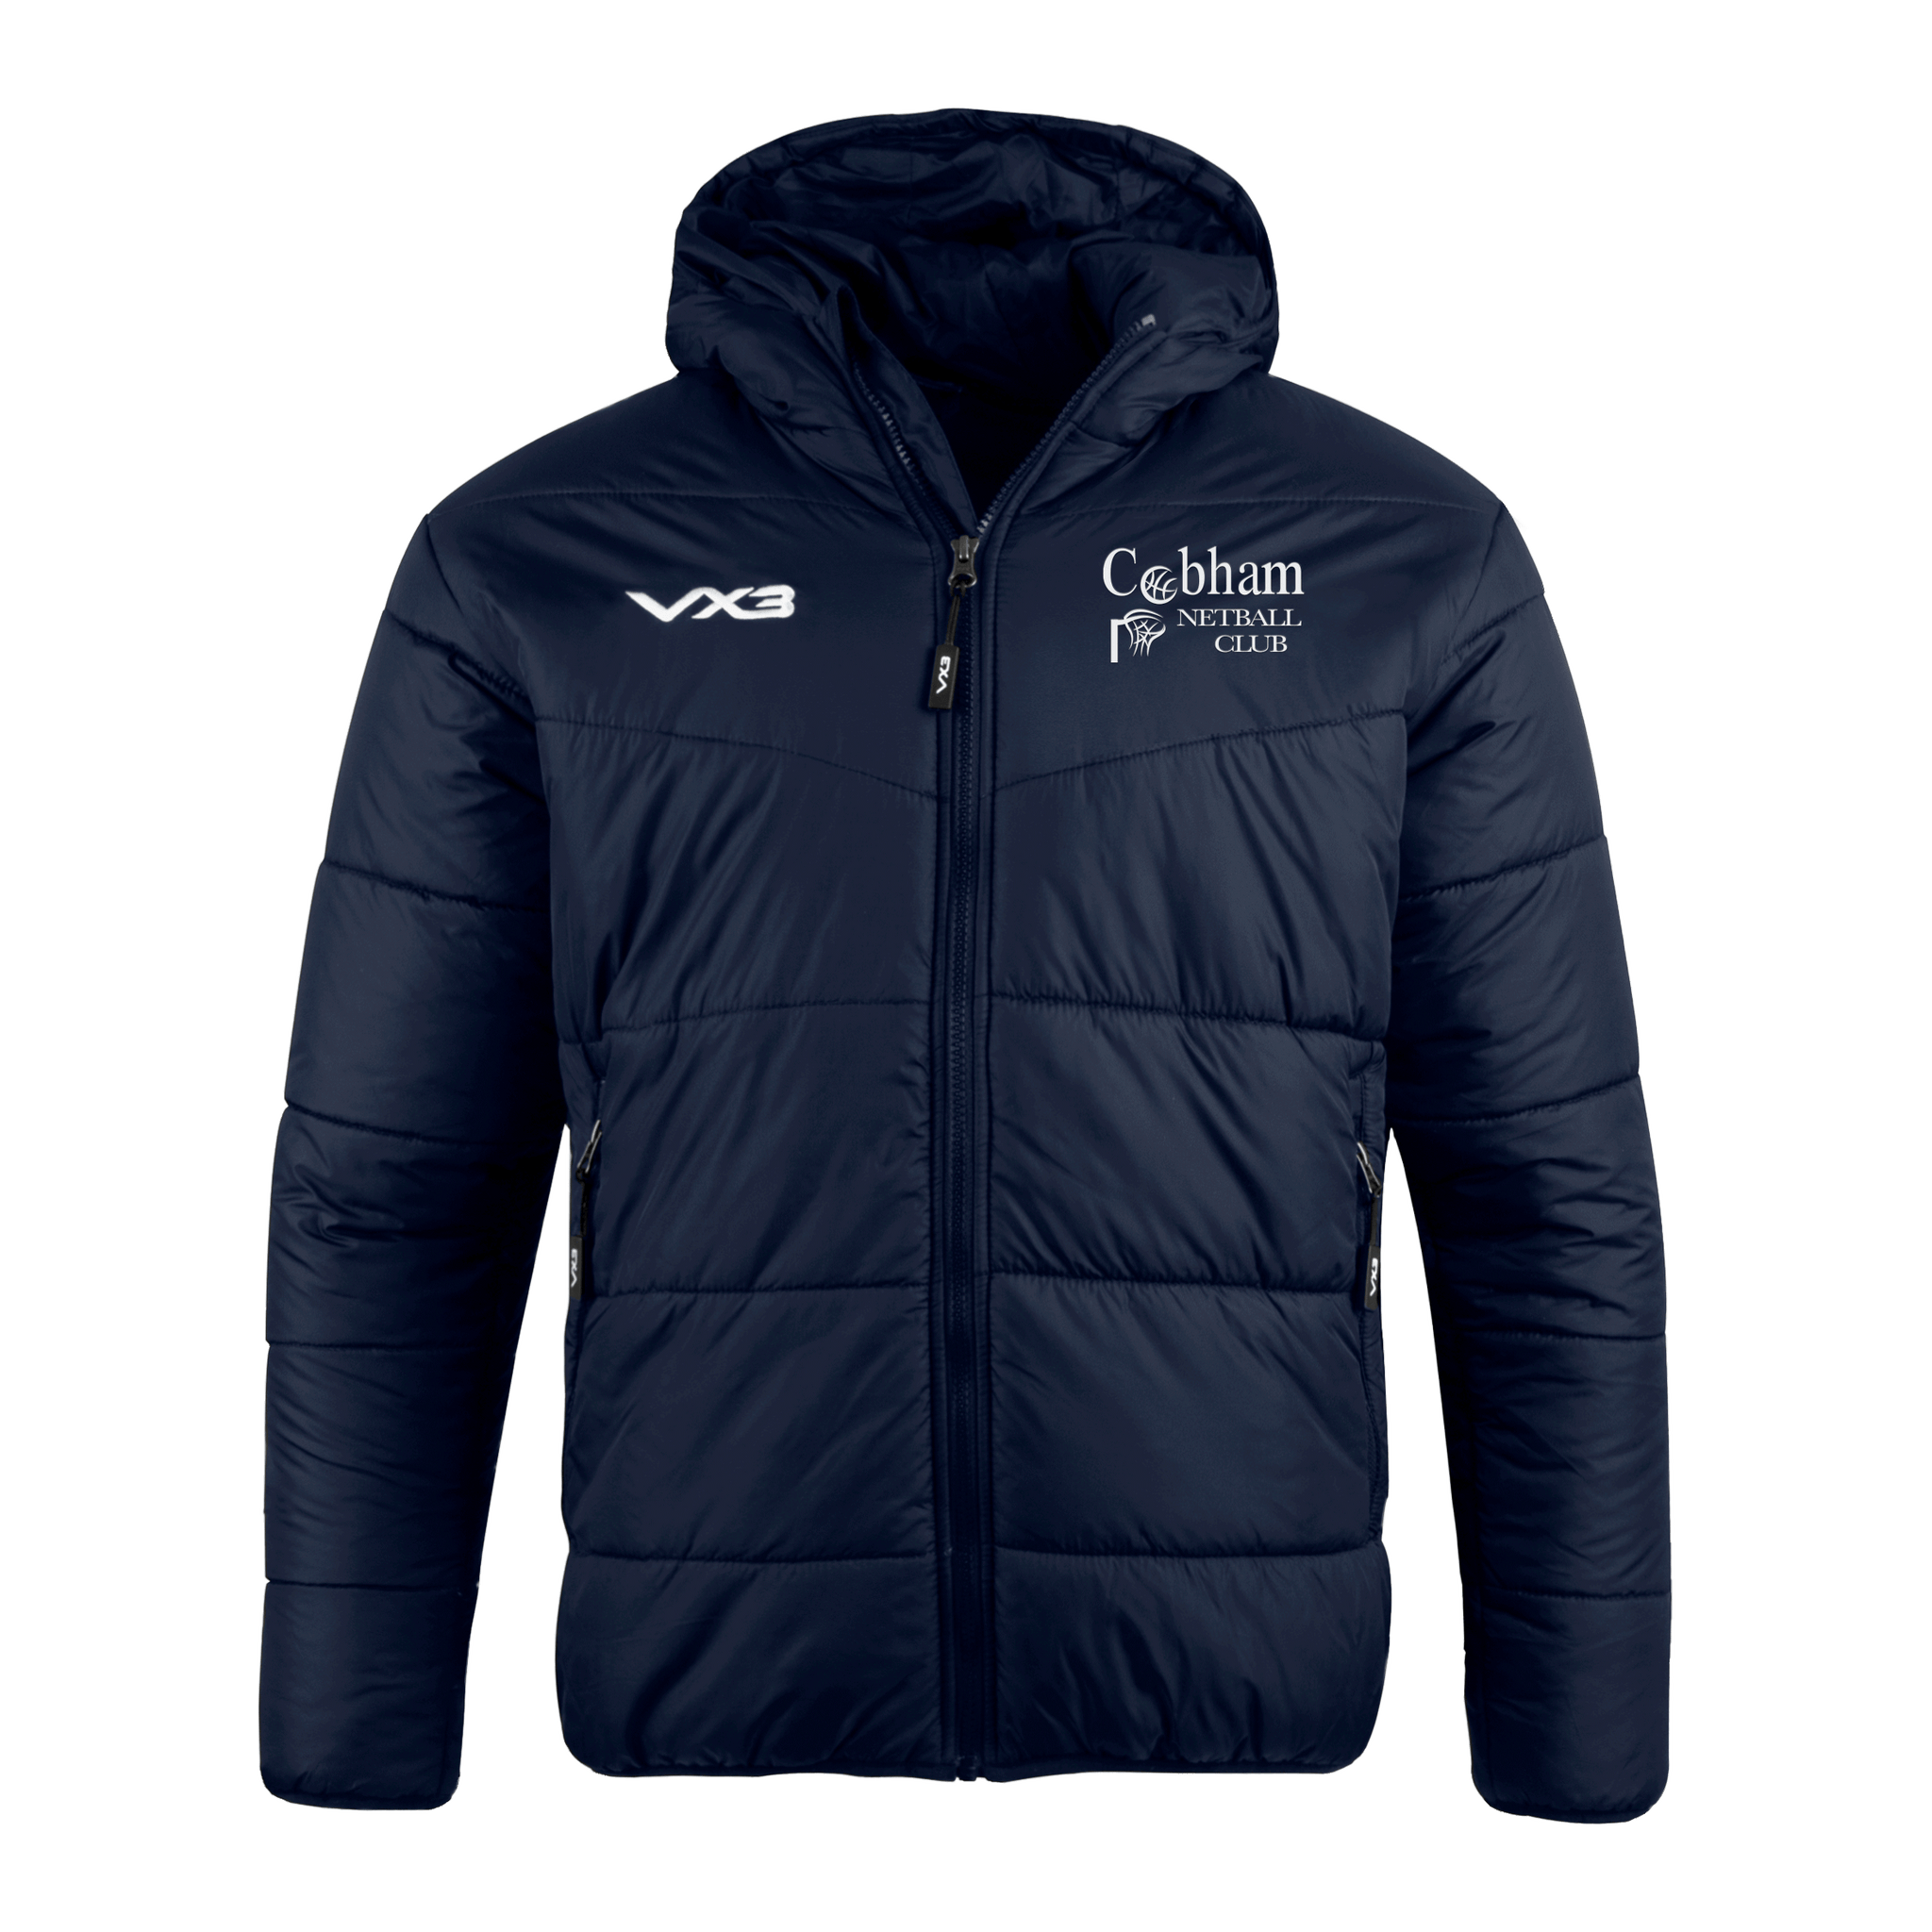 Cobham Netball Club Lorica Quilted Jacket